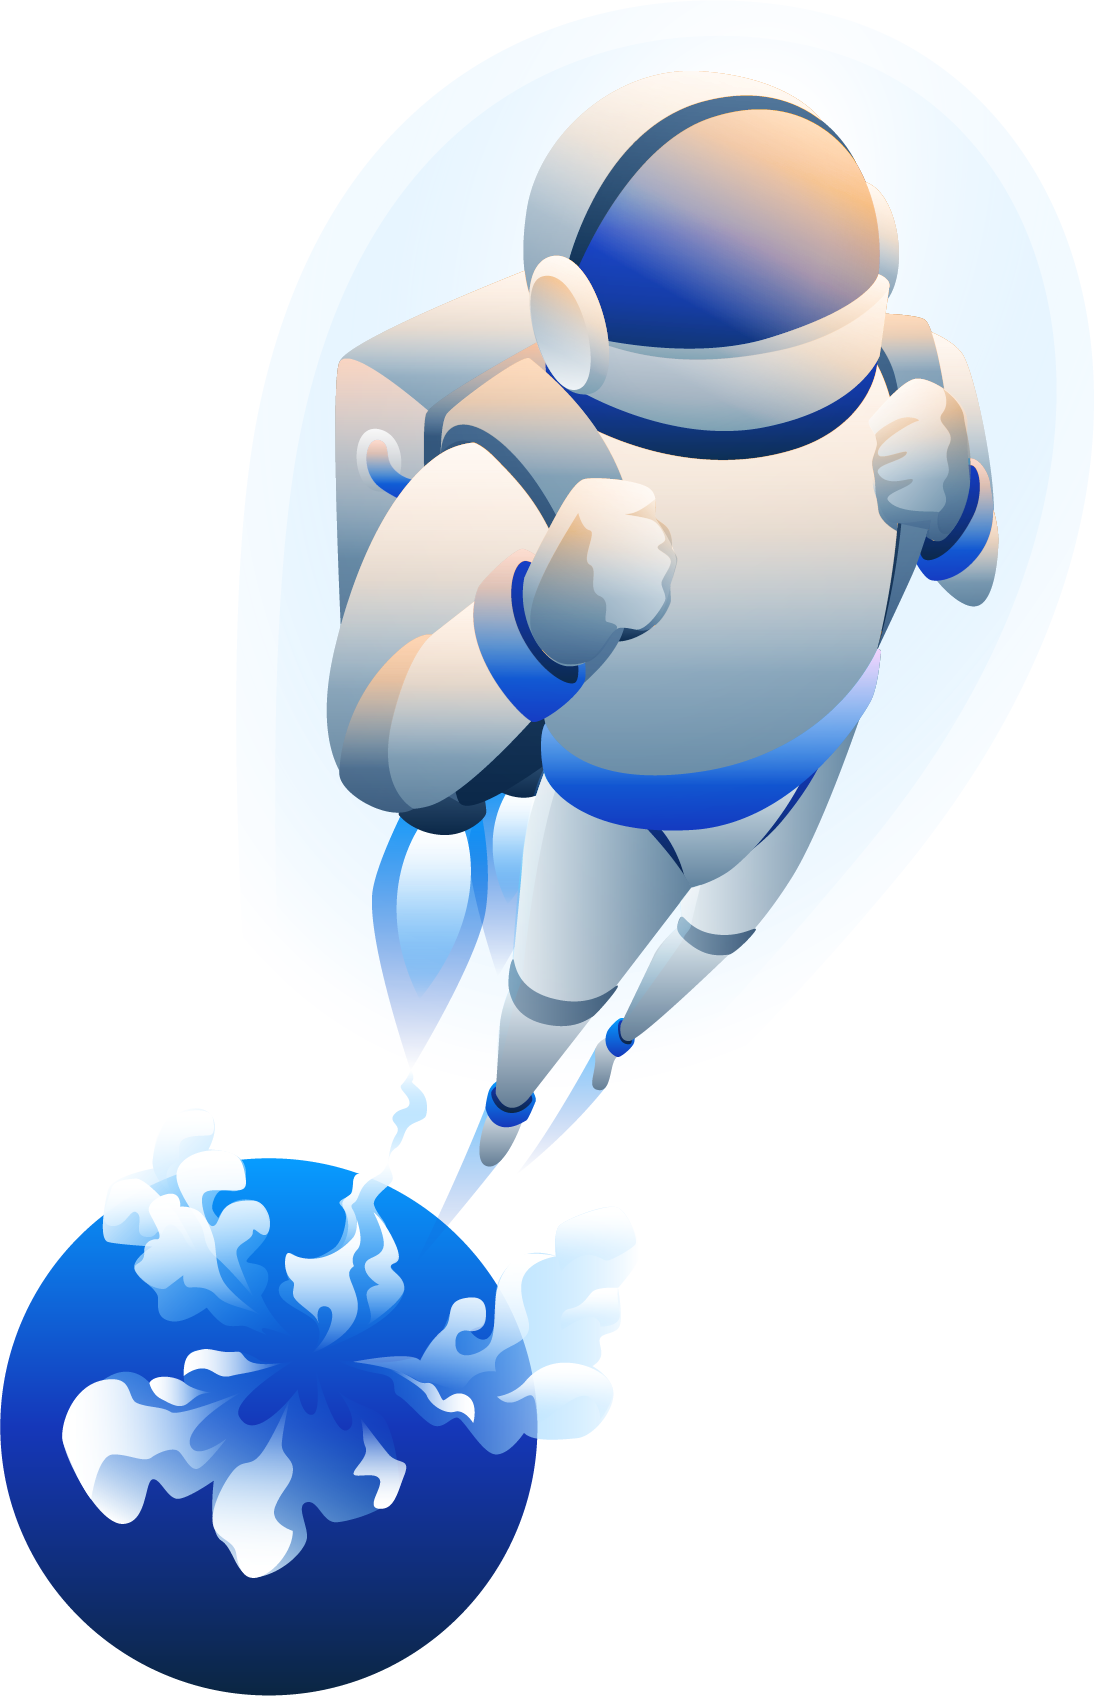 Illustration of an astronaut with a jet pack flying away from a planet